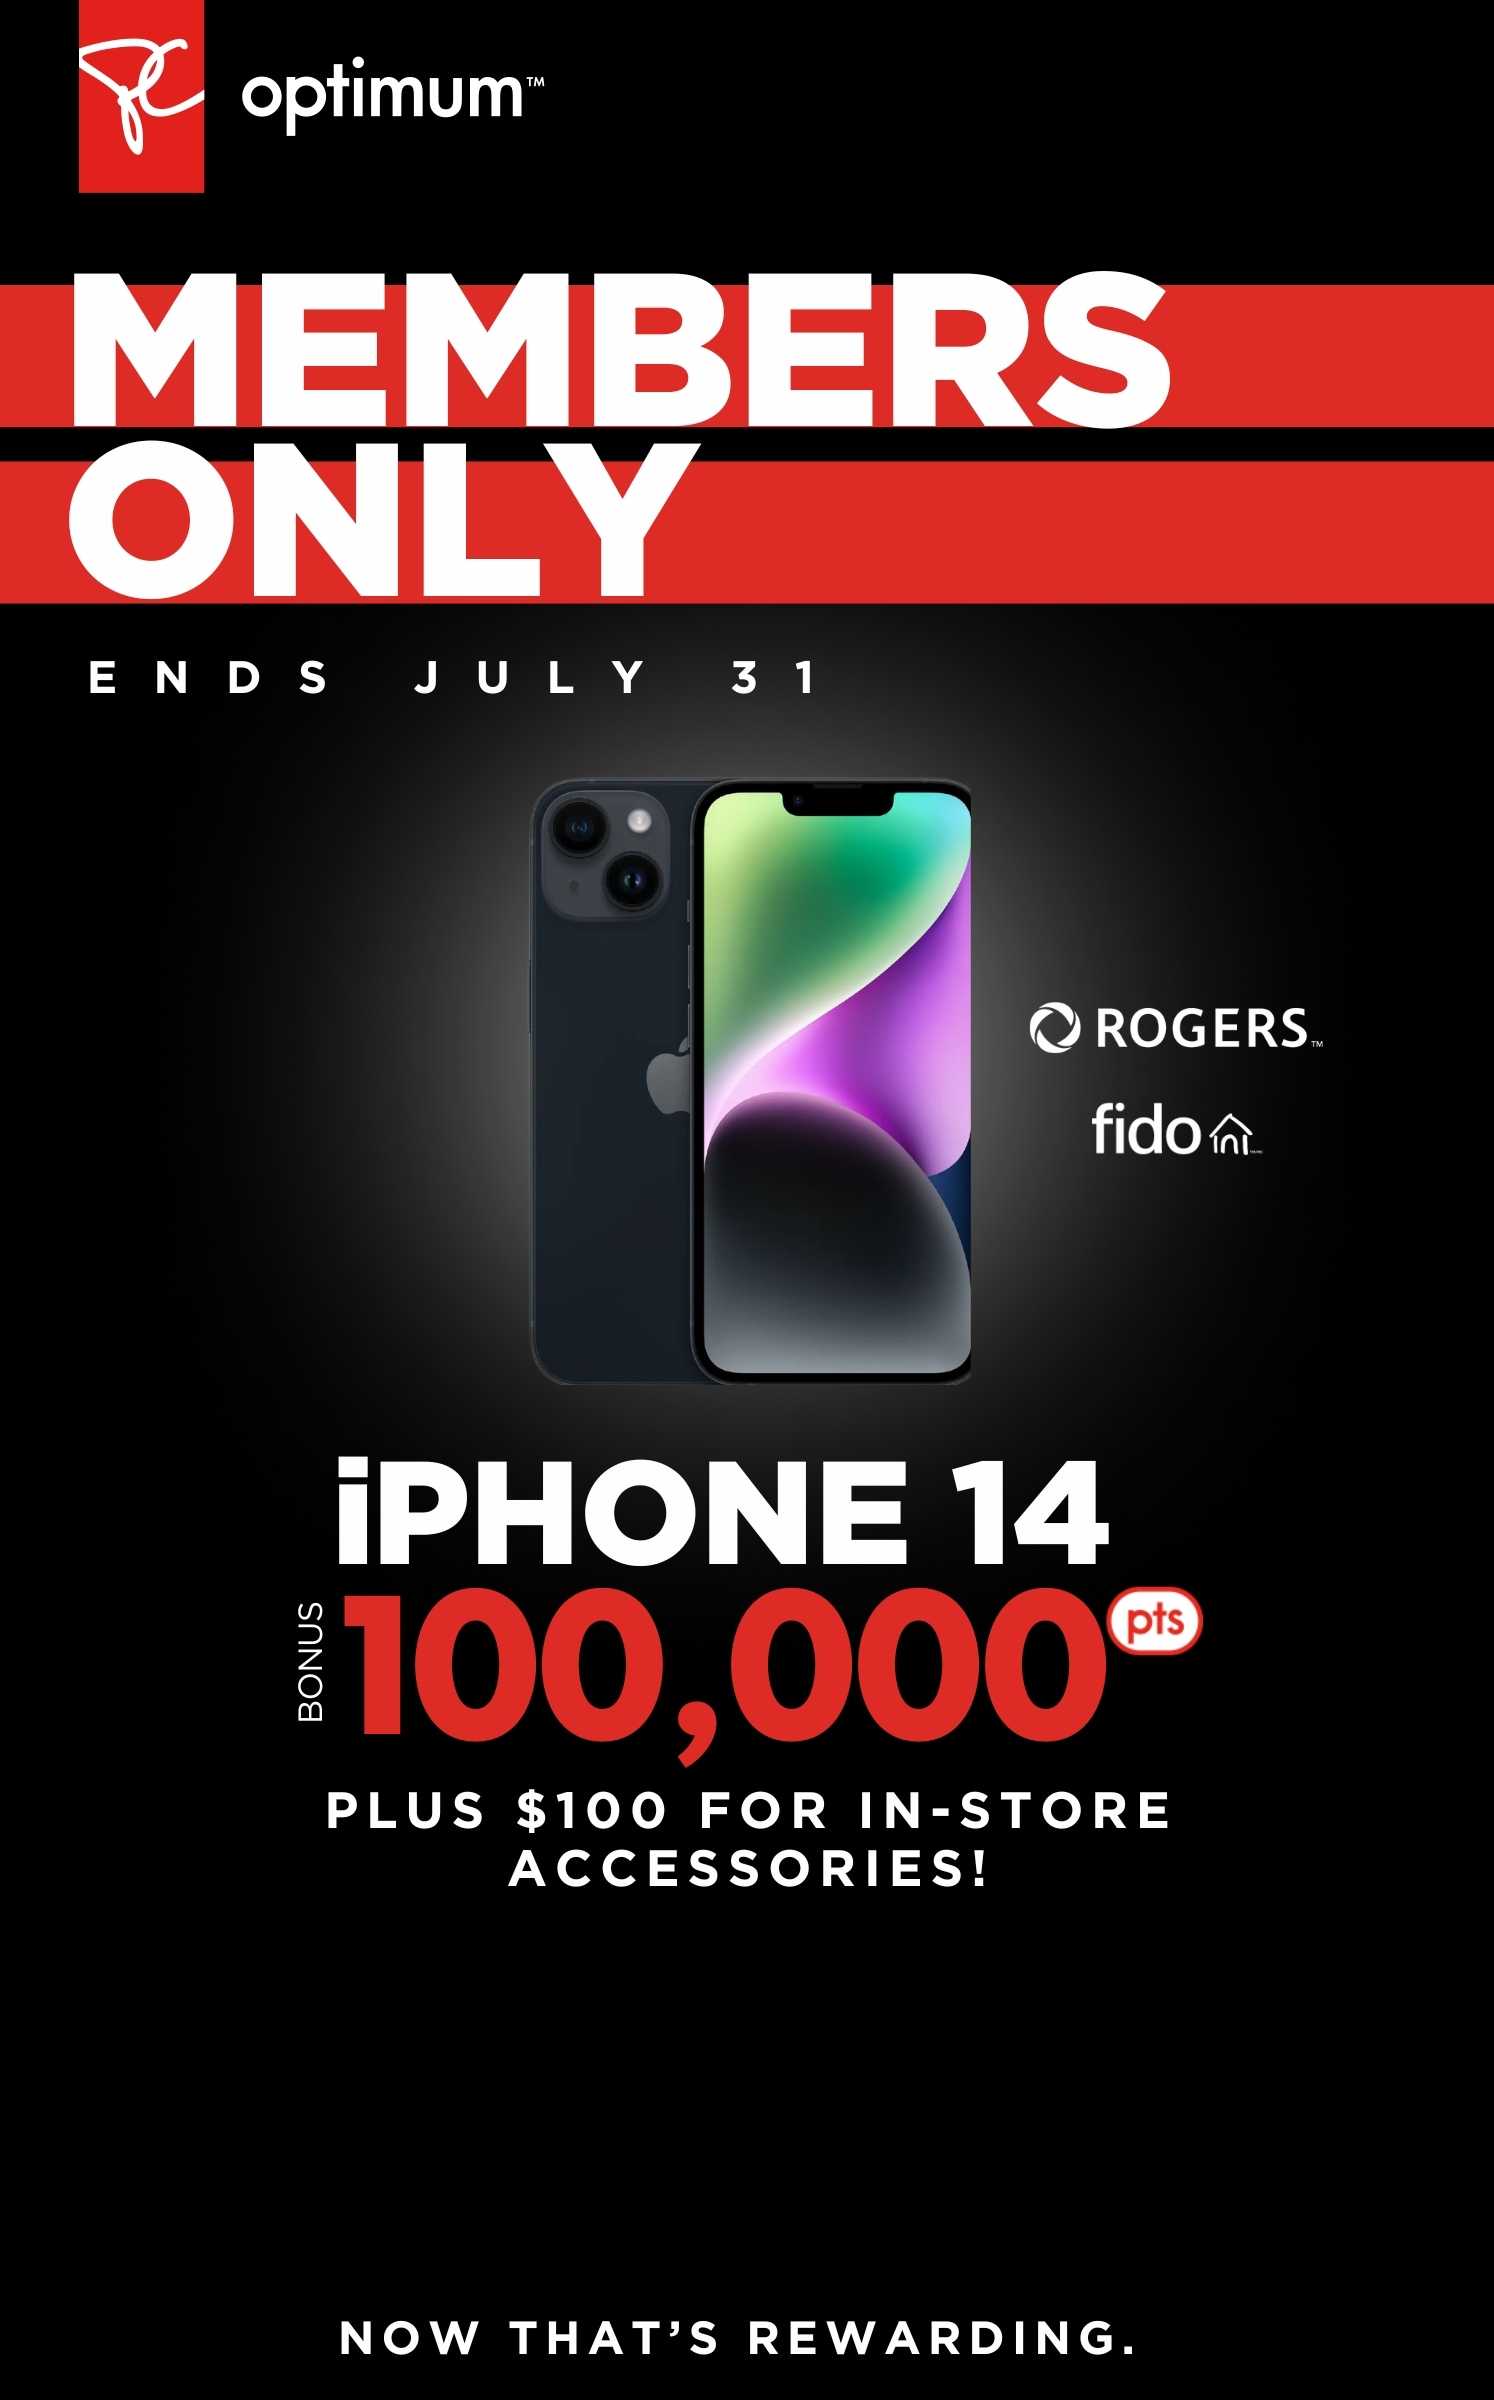 Members only: Get 100,000 points on a 2-year activation or upgrade on an iPhone 14 with Rogers or Fido. Plus, get a $100 credit for accessories in-store. Ends July 31 